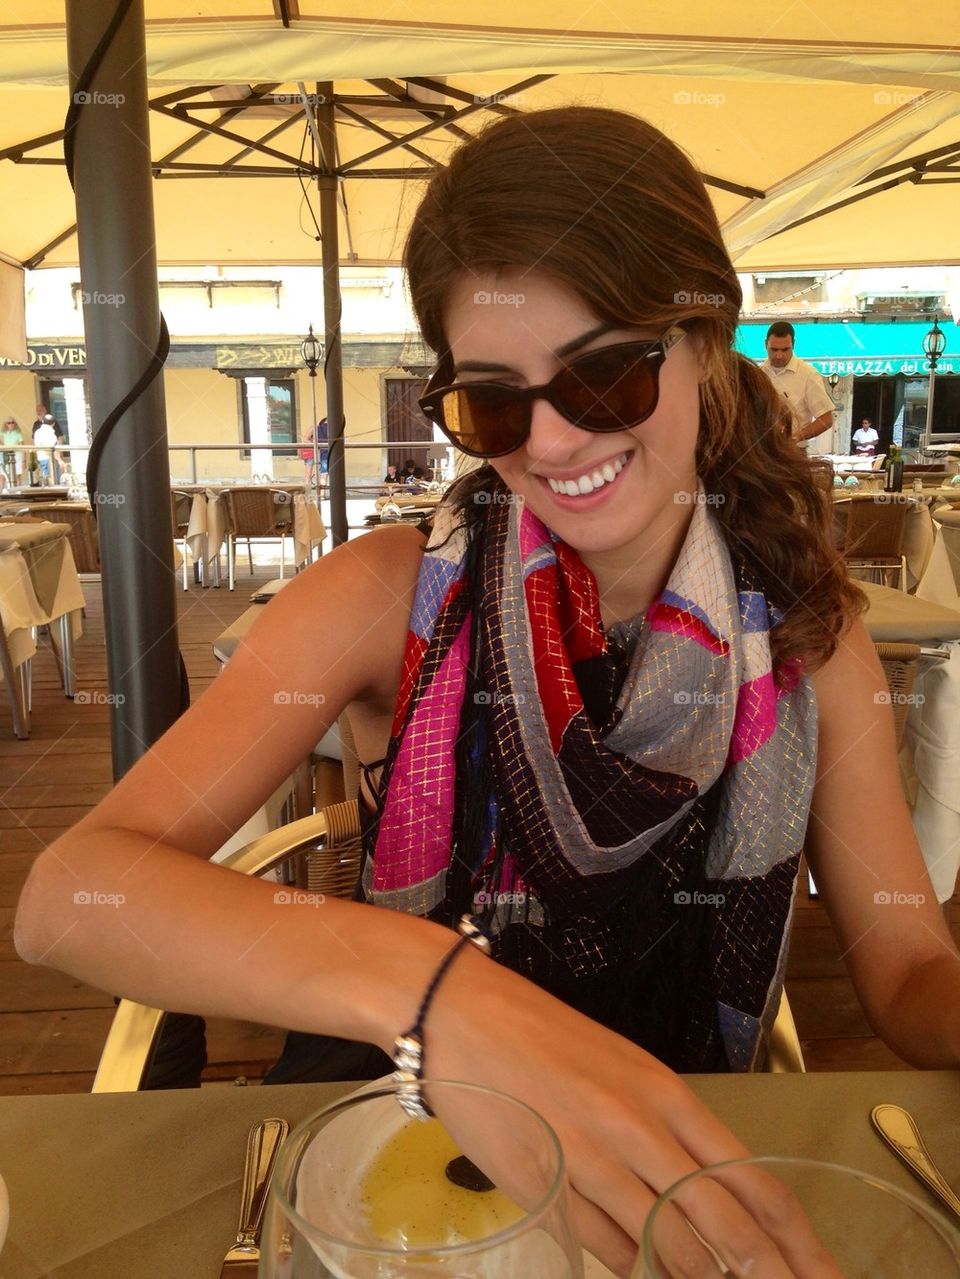 Eating lunch on the Grand Canal in Venice